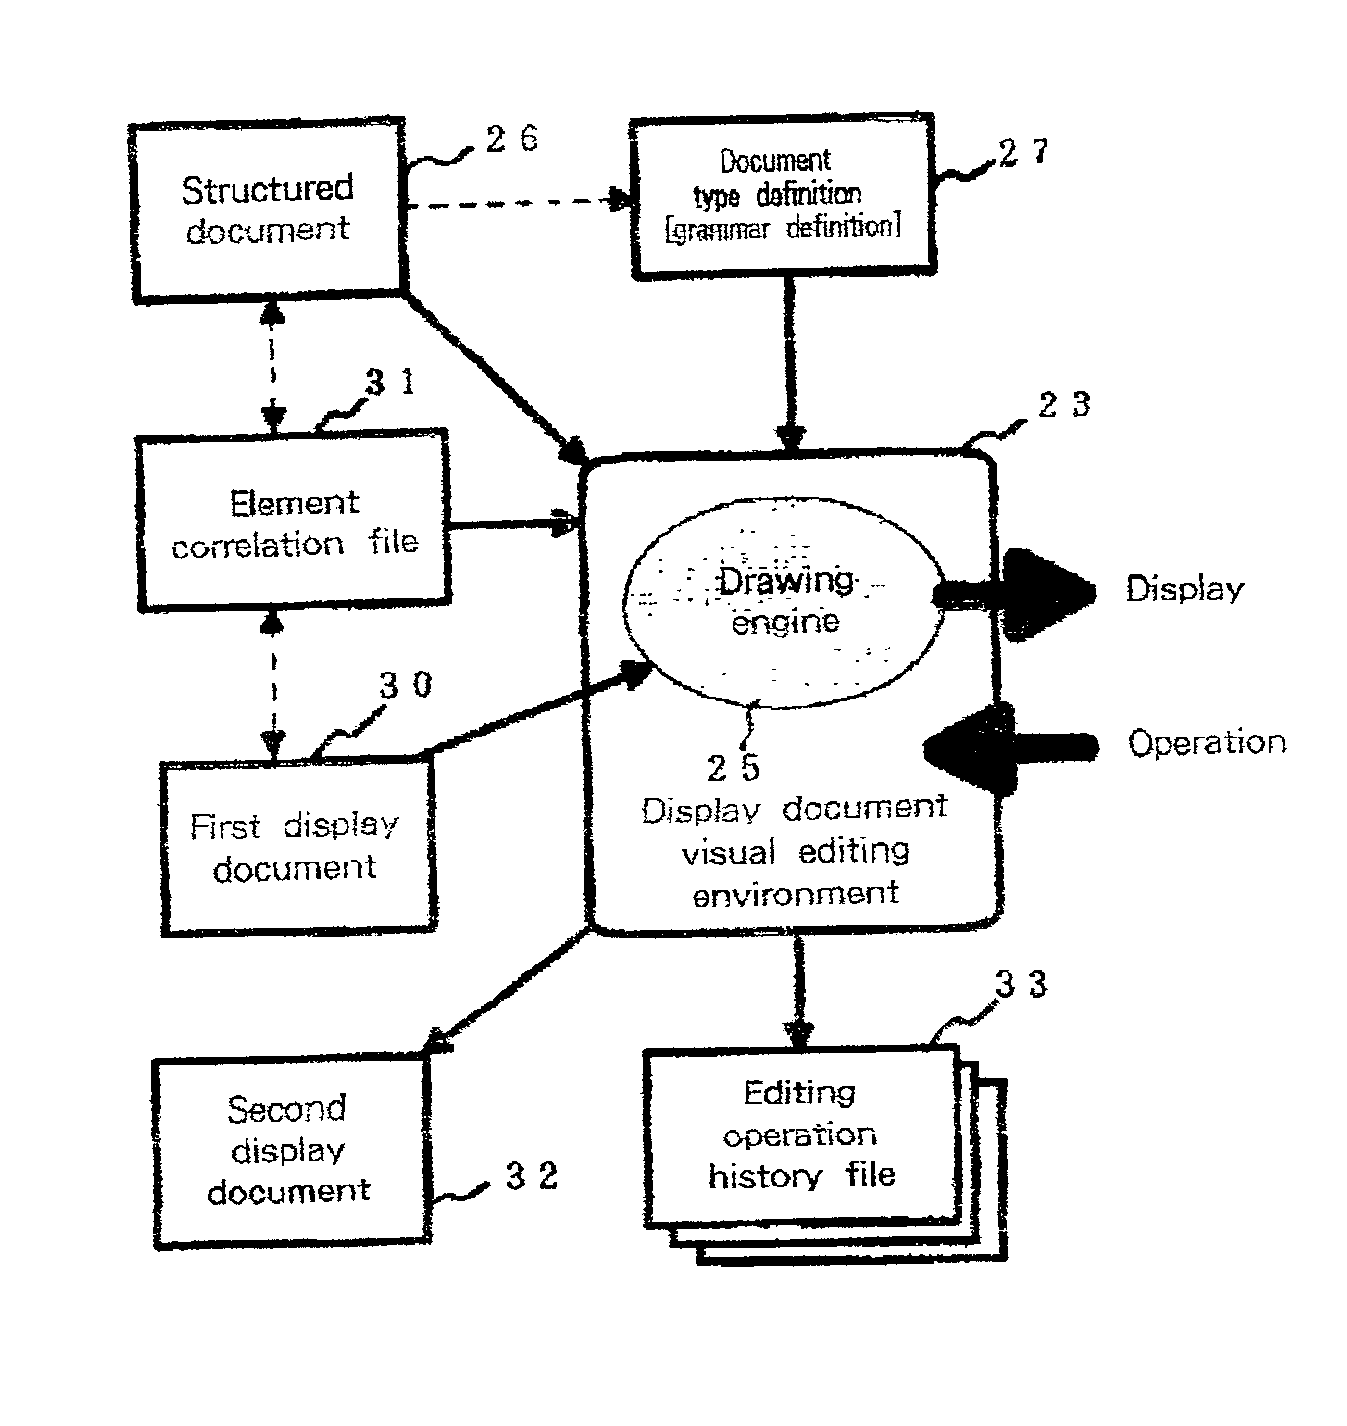 Method, system for, and program product for generating a display rule for a structured document, and for changing a structured document and its document type definition